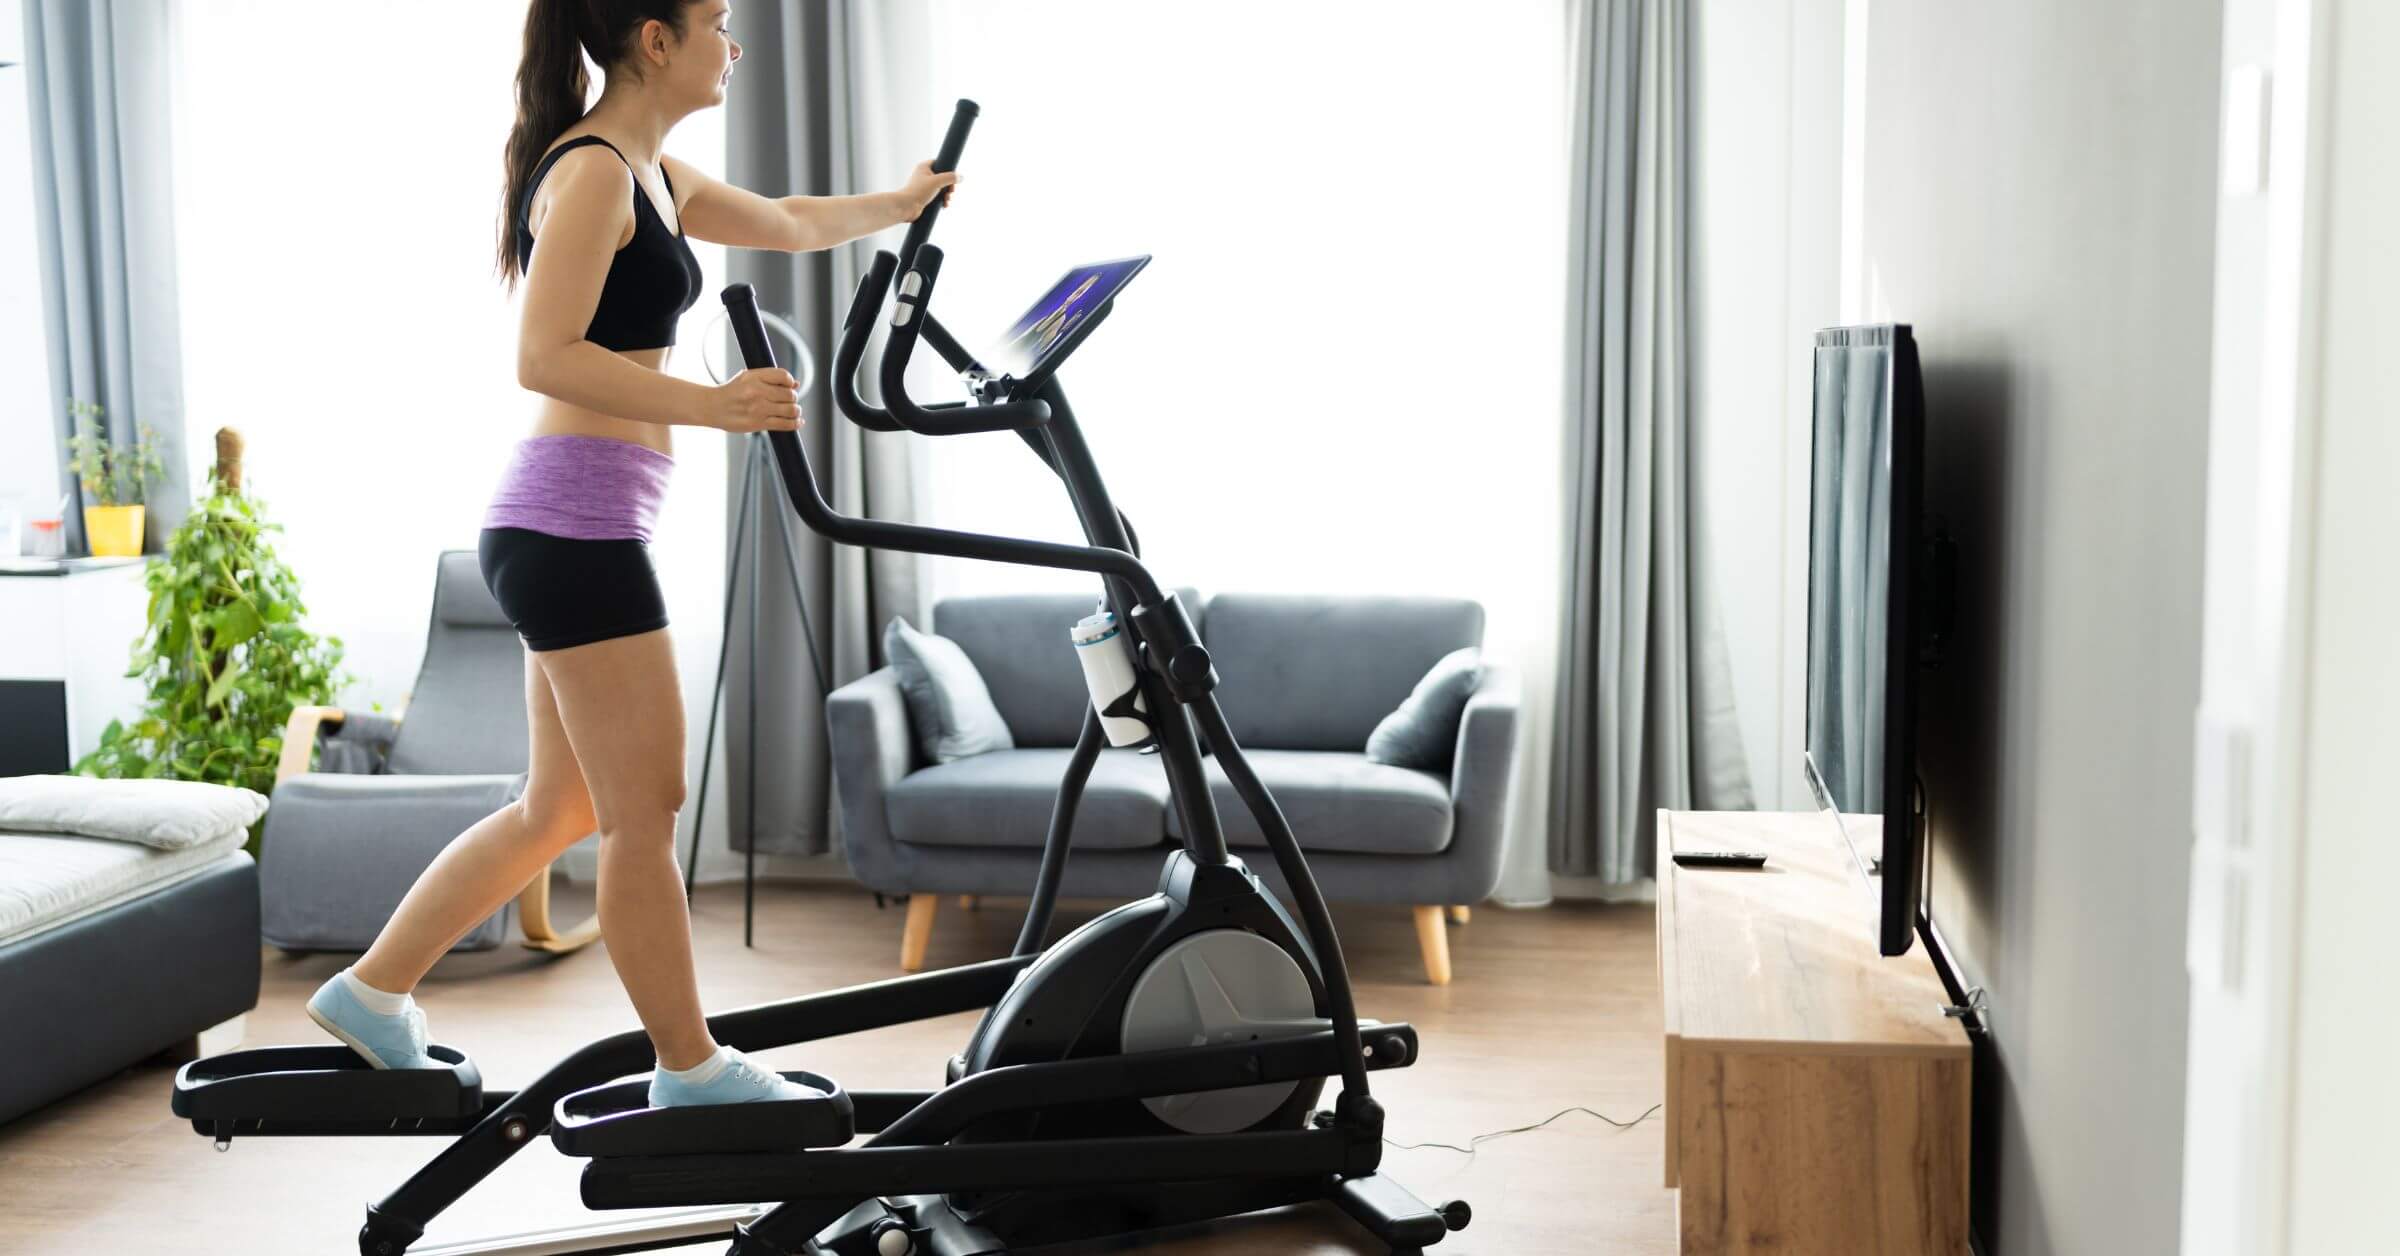 Thirty minutes of exercising with ellipticals are ideal